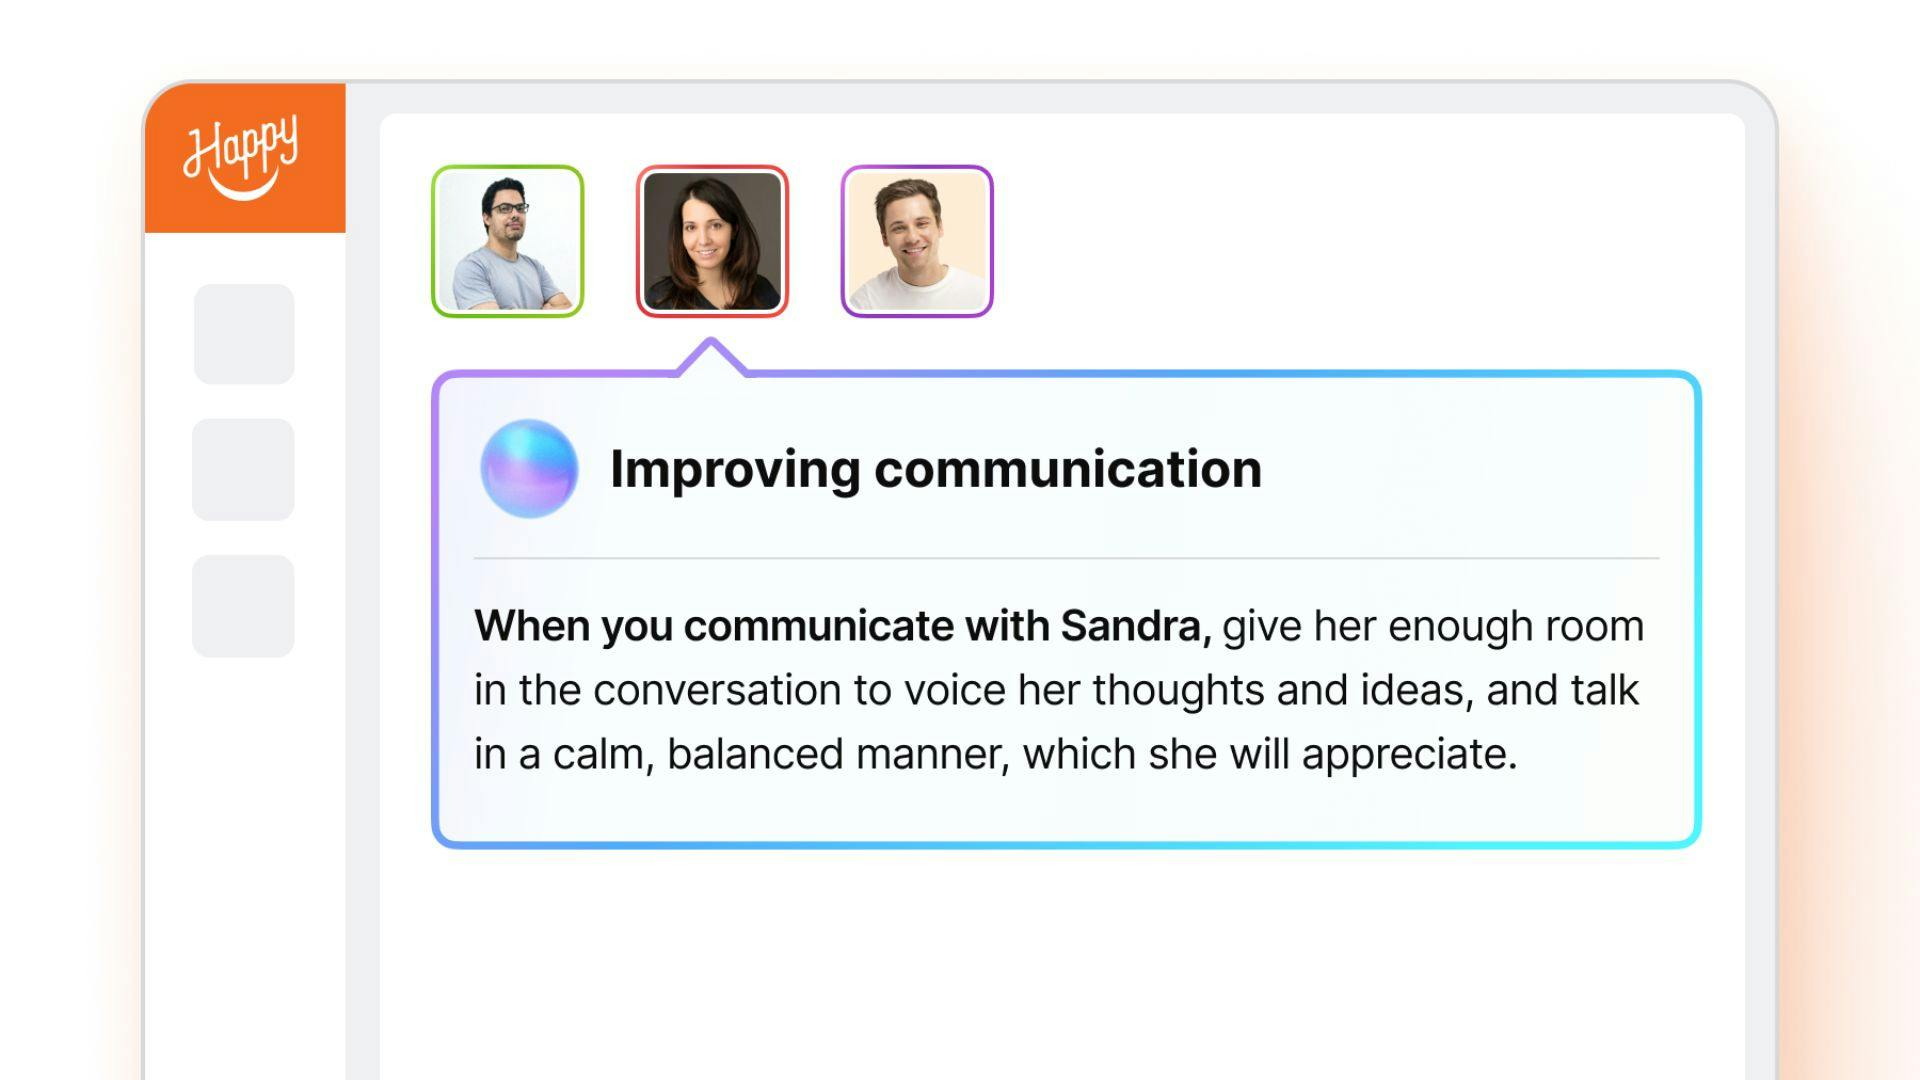 Image of Happy Coach, demonstrating how it improves communication through personalized insights.